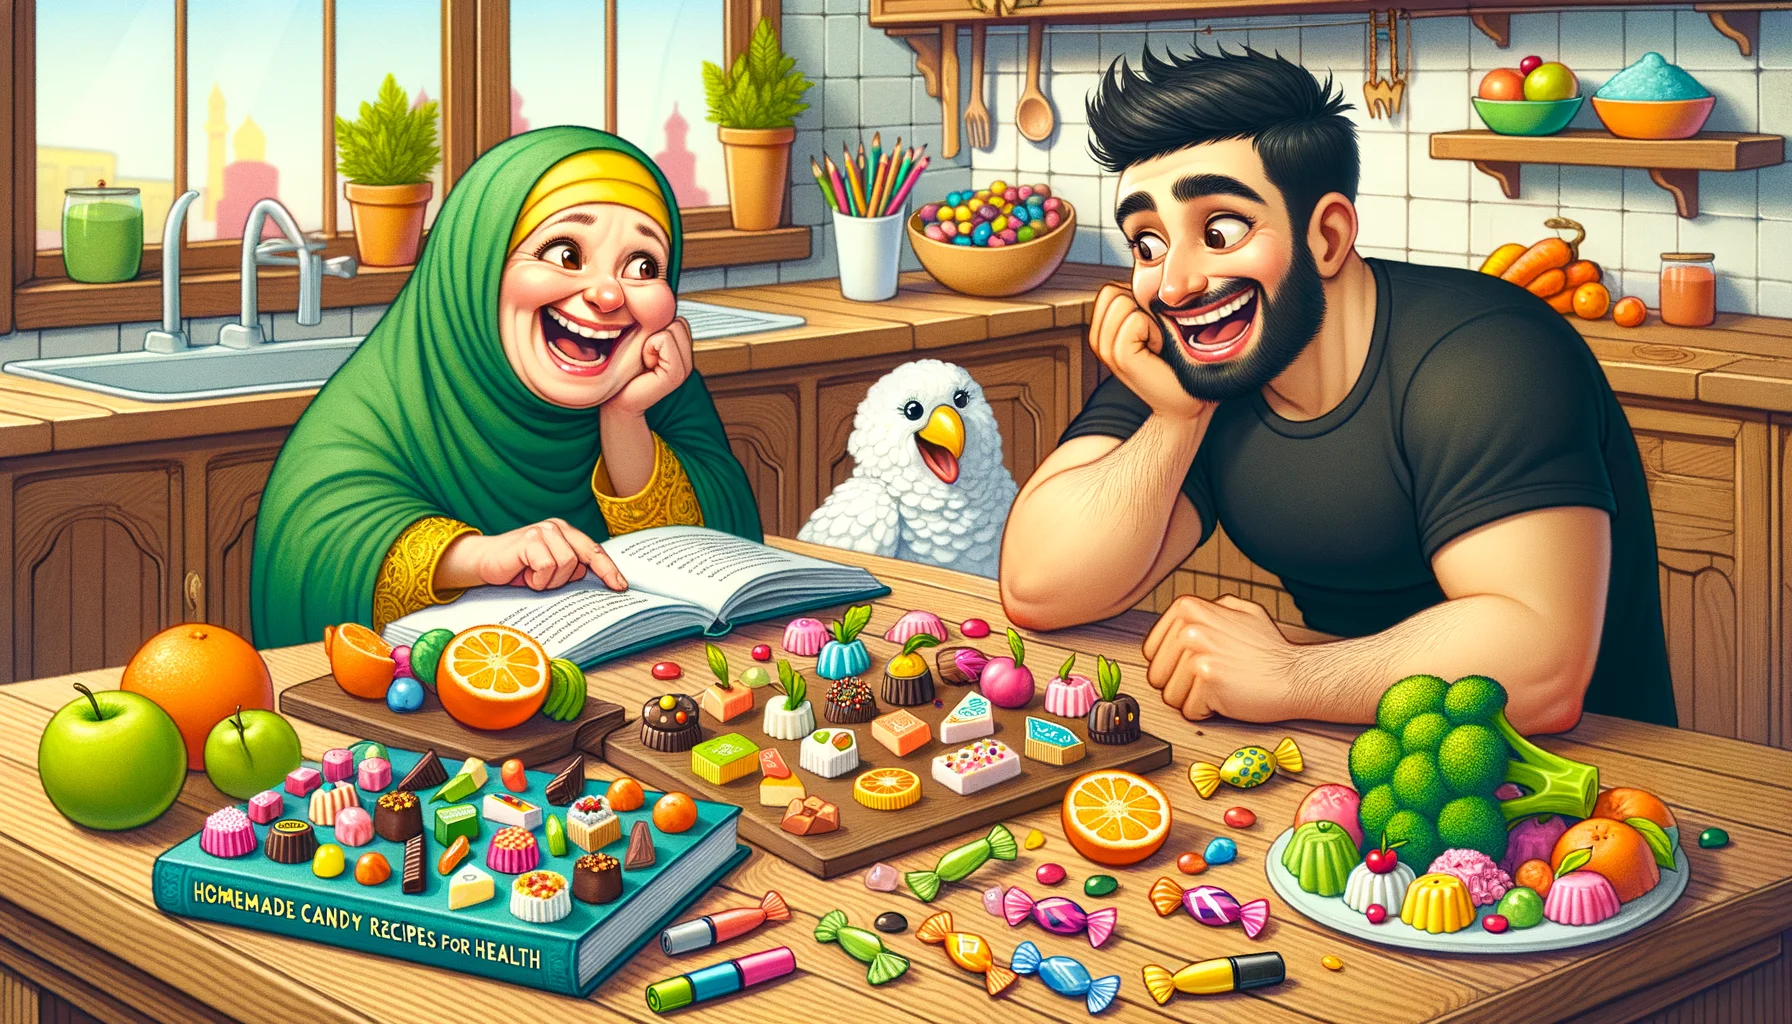 Illustrate a delightfully comic scene in a cozy, homey kitchen. A cheerful Middle Eastern woman and a jovial Hispanic man are bonding over an assortment of homemade candies. The candy, decorated with cheerful, health-themed icons like citrus fruits, broccoli, and dumbbells, are sprawled out on the wooden kitchen table. A recipe book titled 'Homemade Candy Recipes for Health' lies open nearby, with colorful markers peeking out of the pages. A pesky dog tries to snatch a piece of candy while a parrot with a celery stick in its beak observes the scene with amusement.